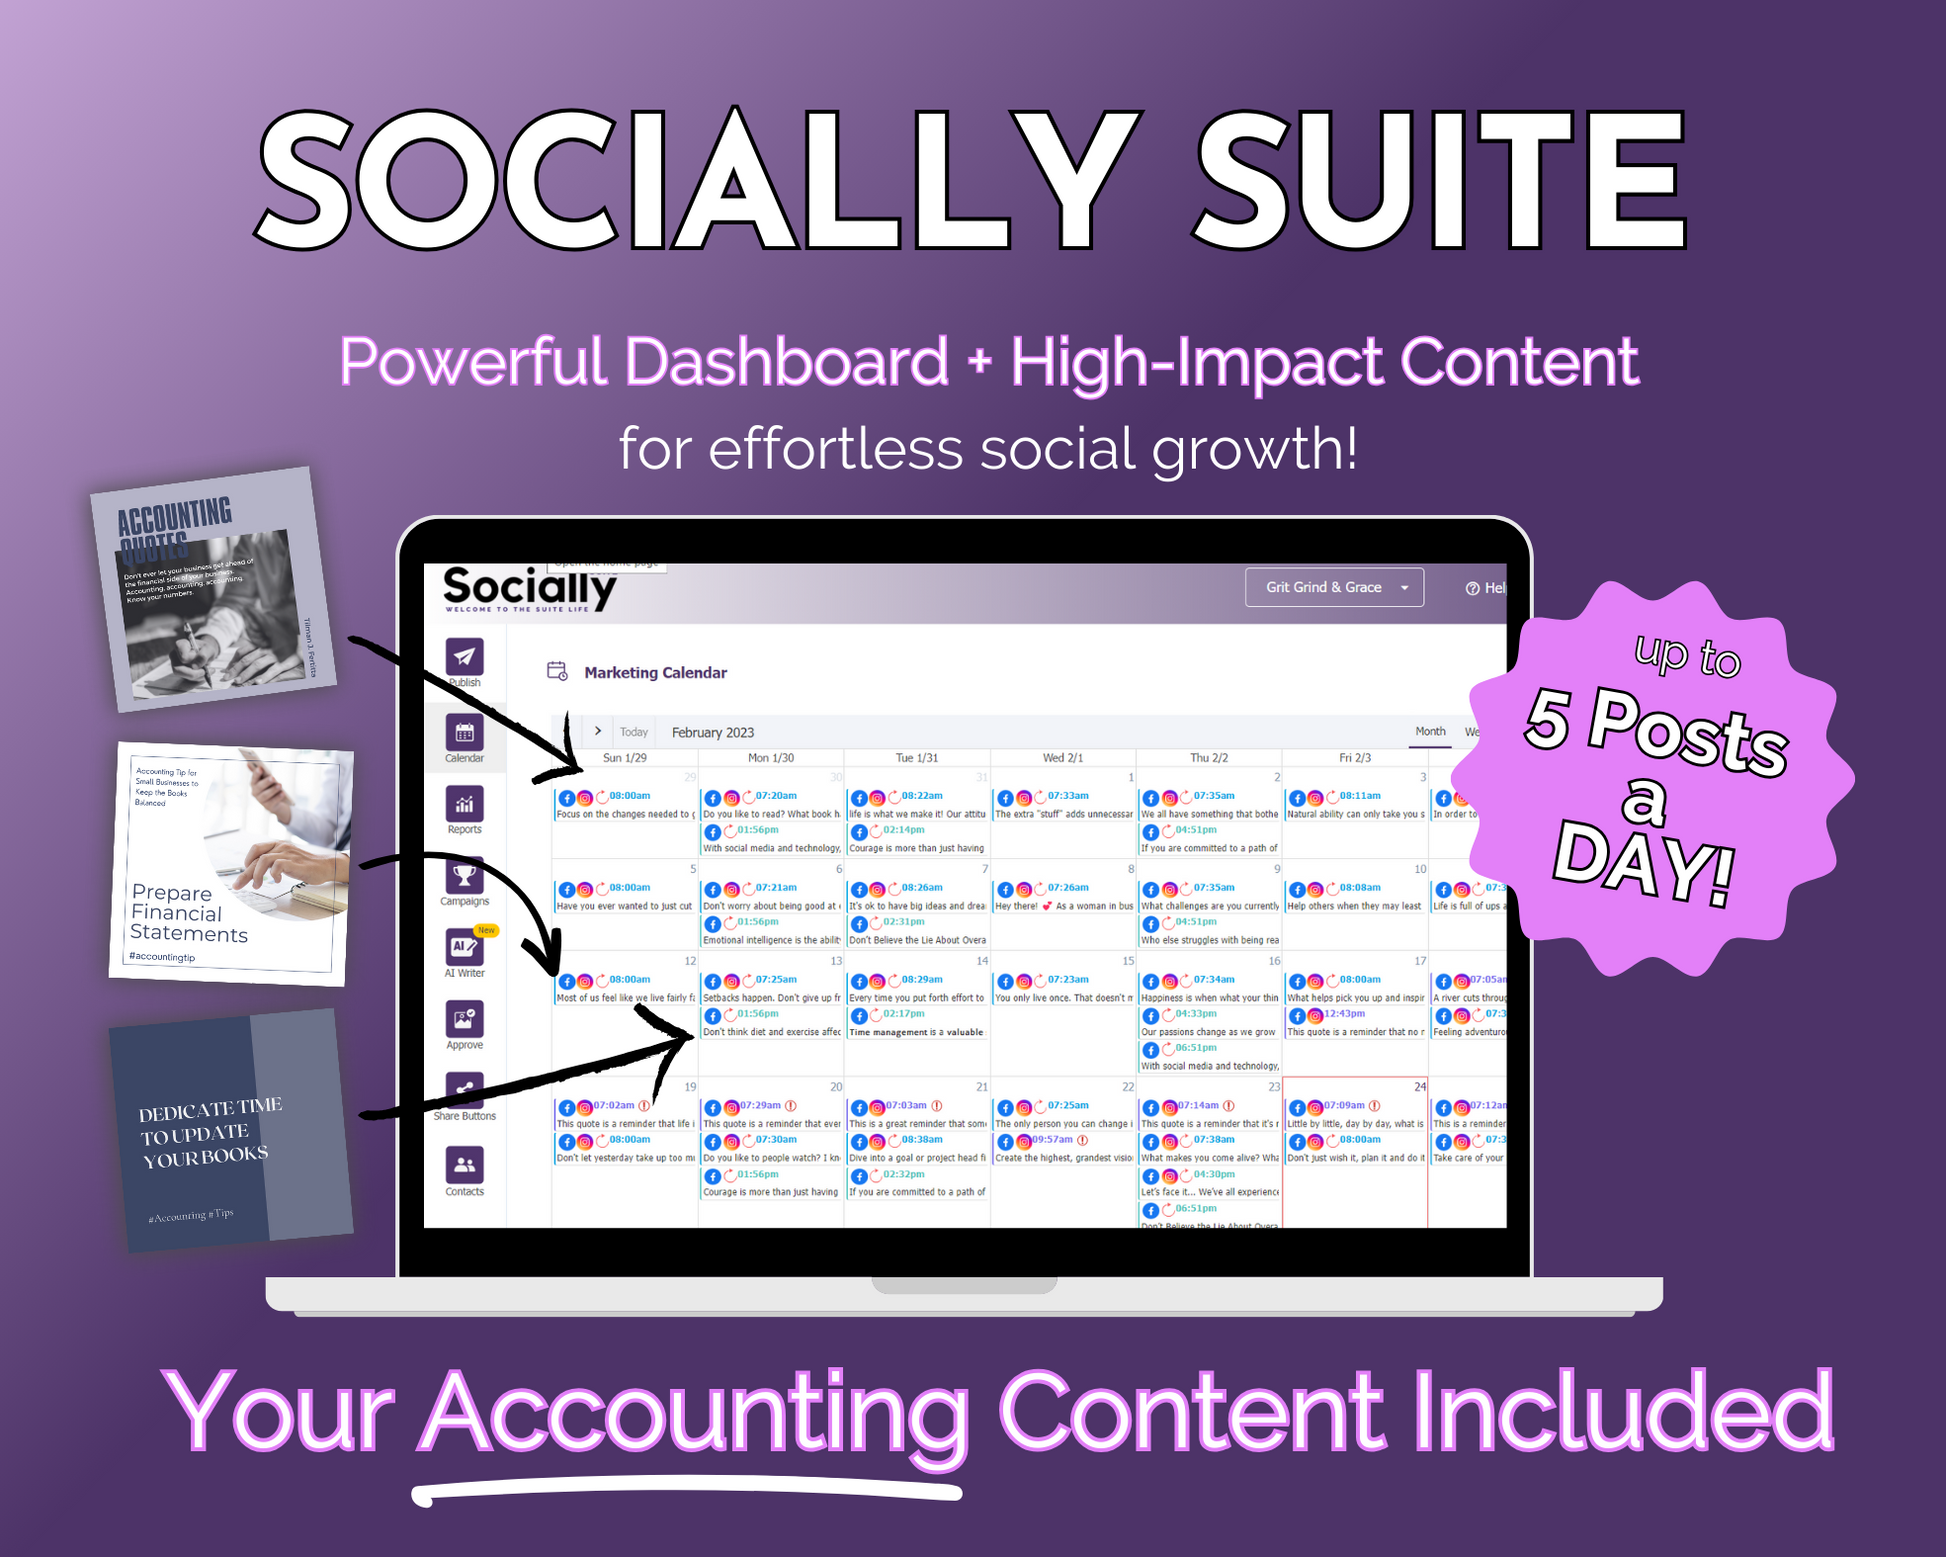 Get Socially Inclined's Socially Suite Membership is a powerful dashboard designed for managing social media presence and content management. It offers high content options and also includes accounting content, making it a comprehensive tool for social media marketing.